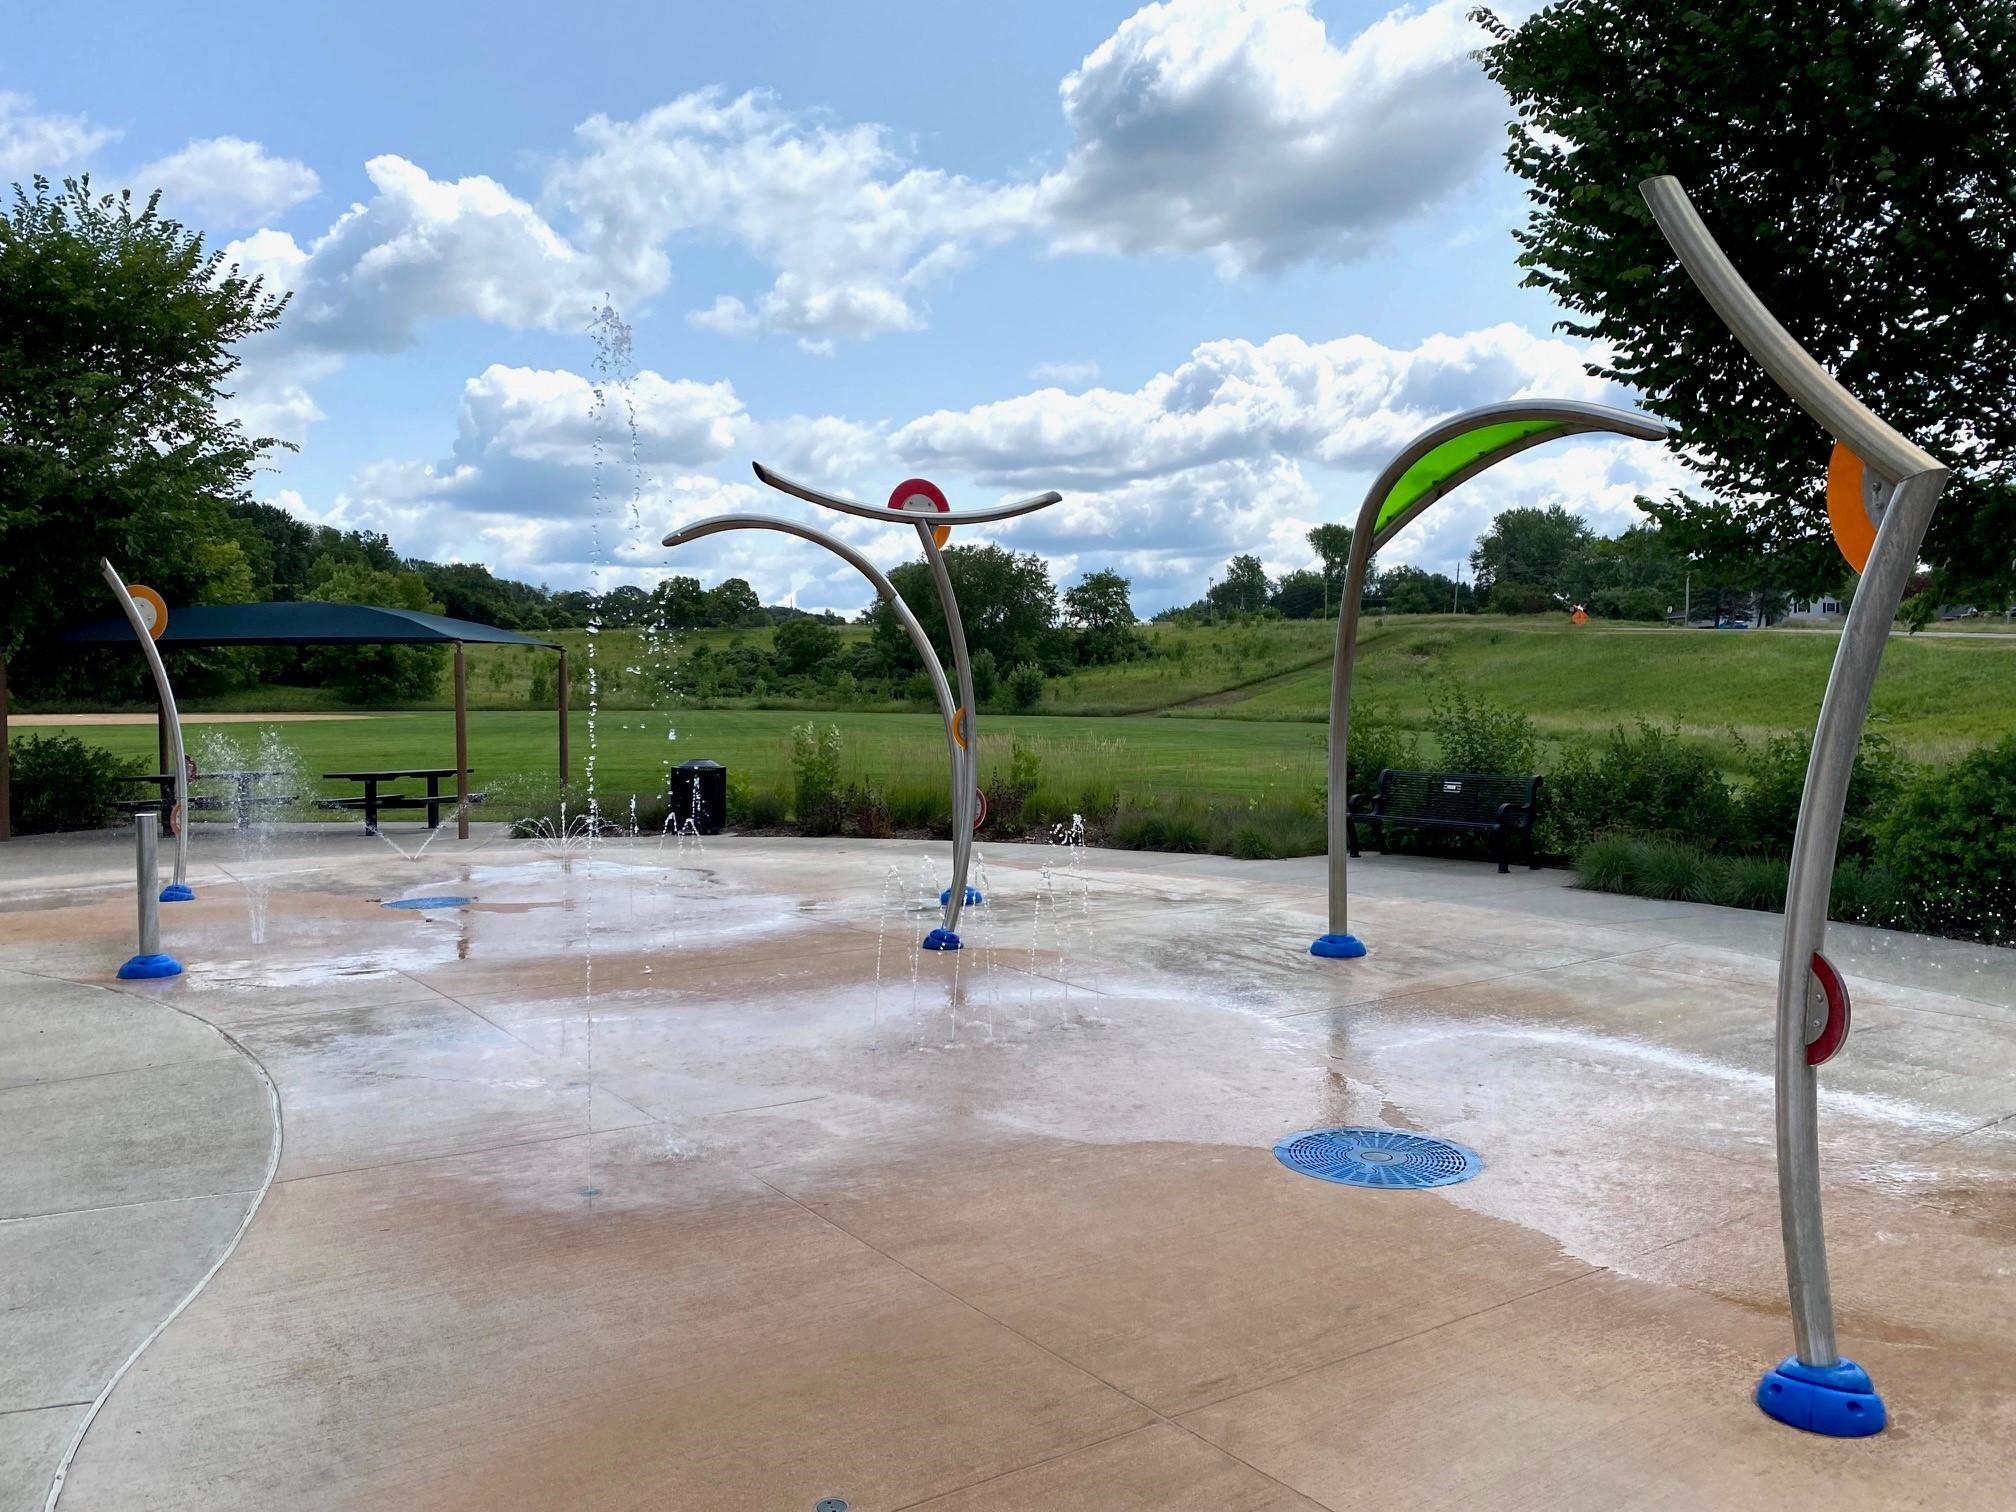 Highlands Park is less than a mile from Hinton Woods and is your one-stop shop park! Basketball, tennis, splash pad, ice rink, sledding hill, soccer field, grills, trails, and more!!